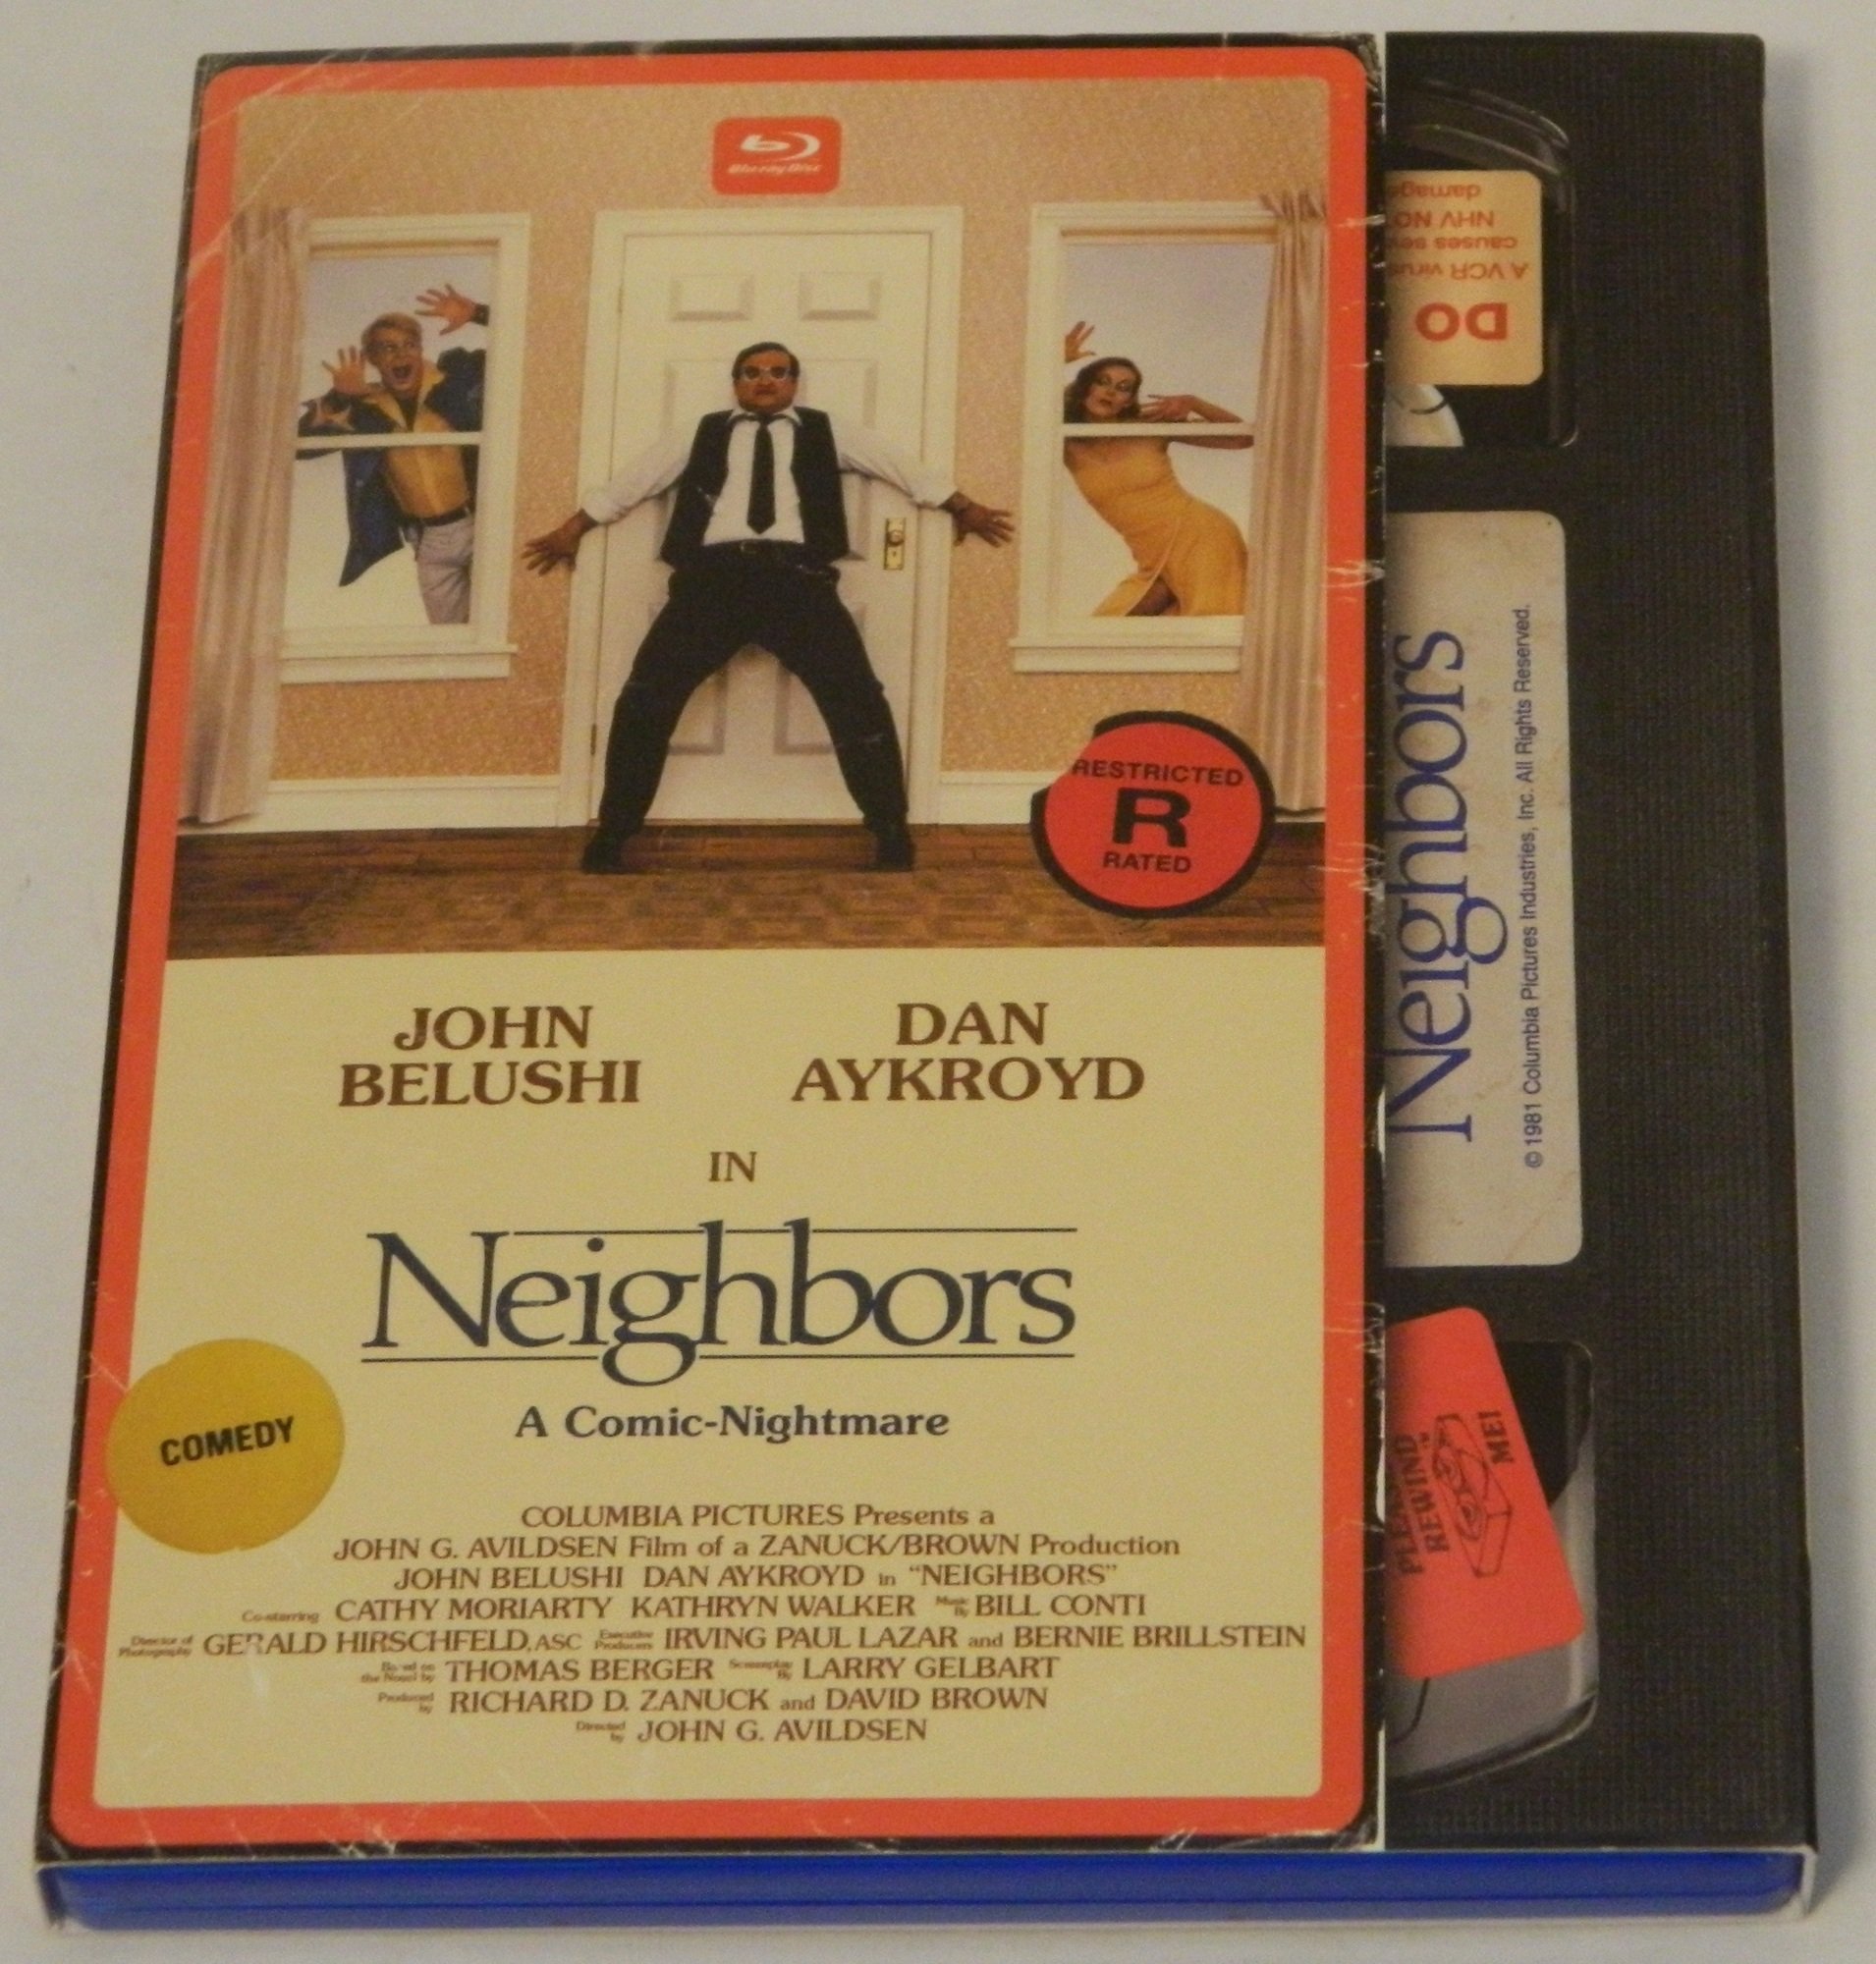 Neighbors (1981) Blu-ray Review (and Mill Creek Entertainment Retro VHS Cover Art Wave 2 Releases)